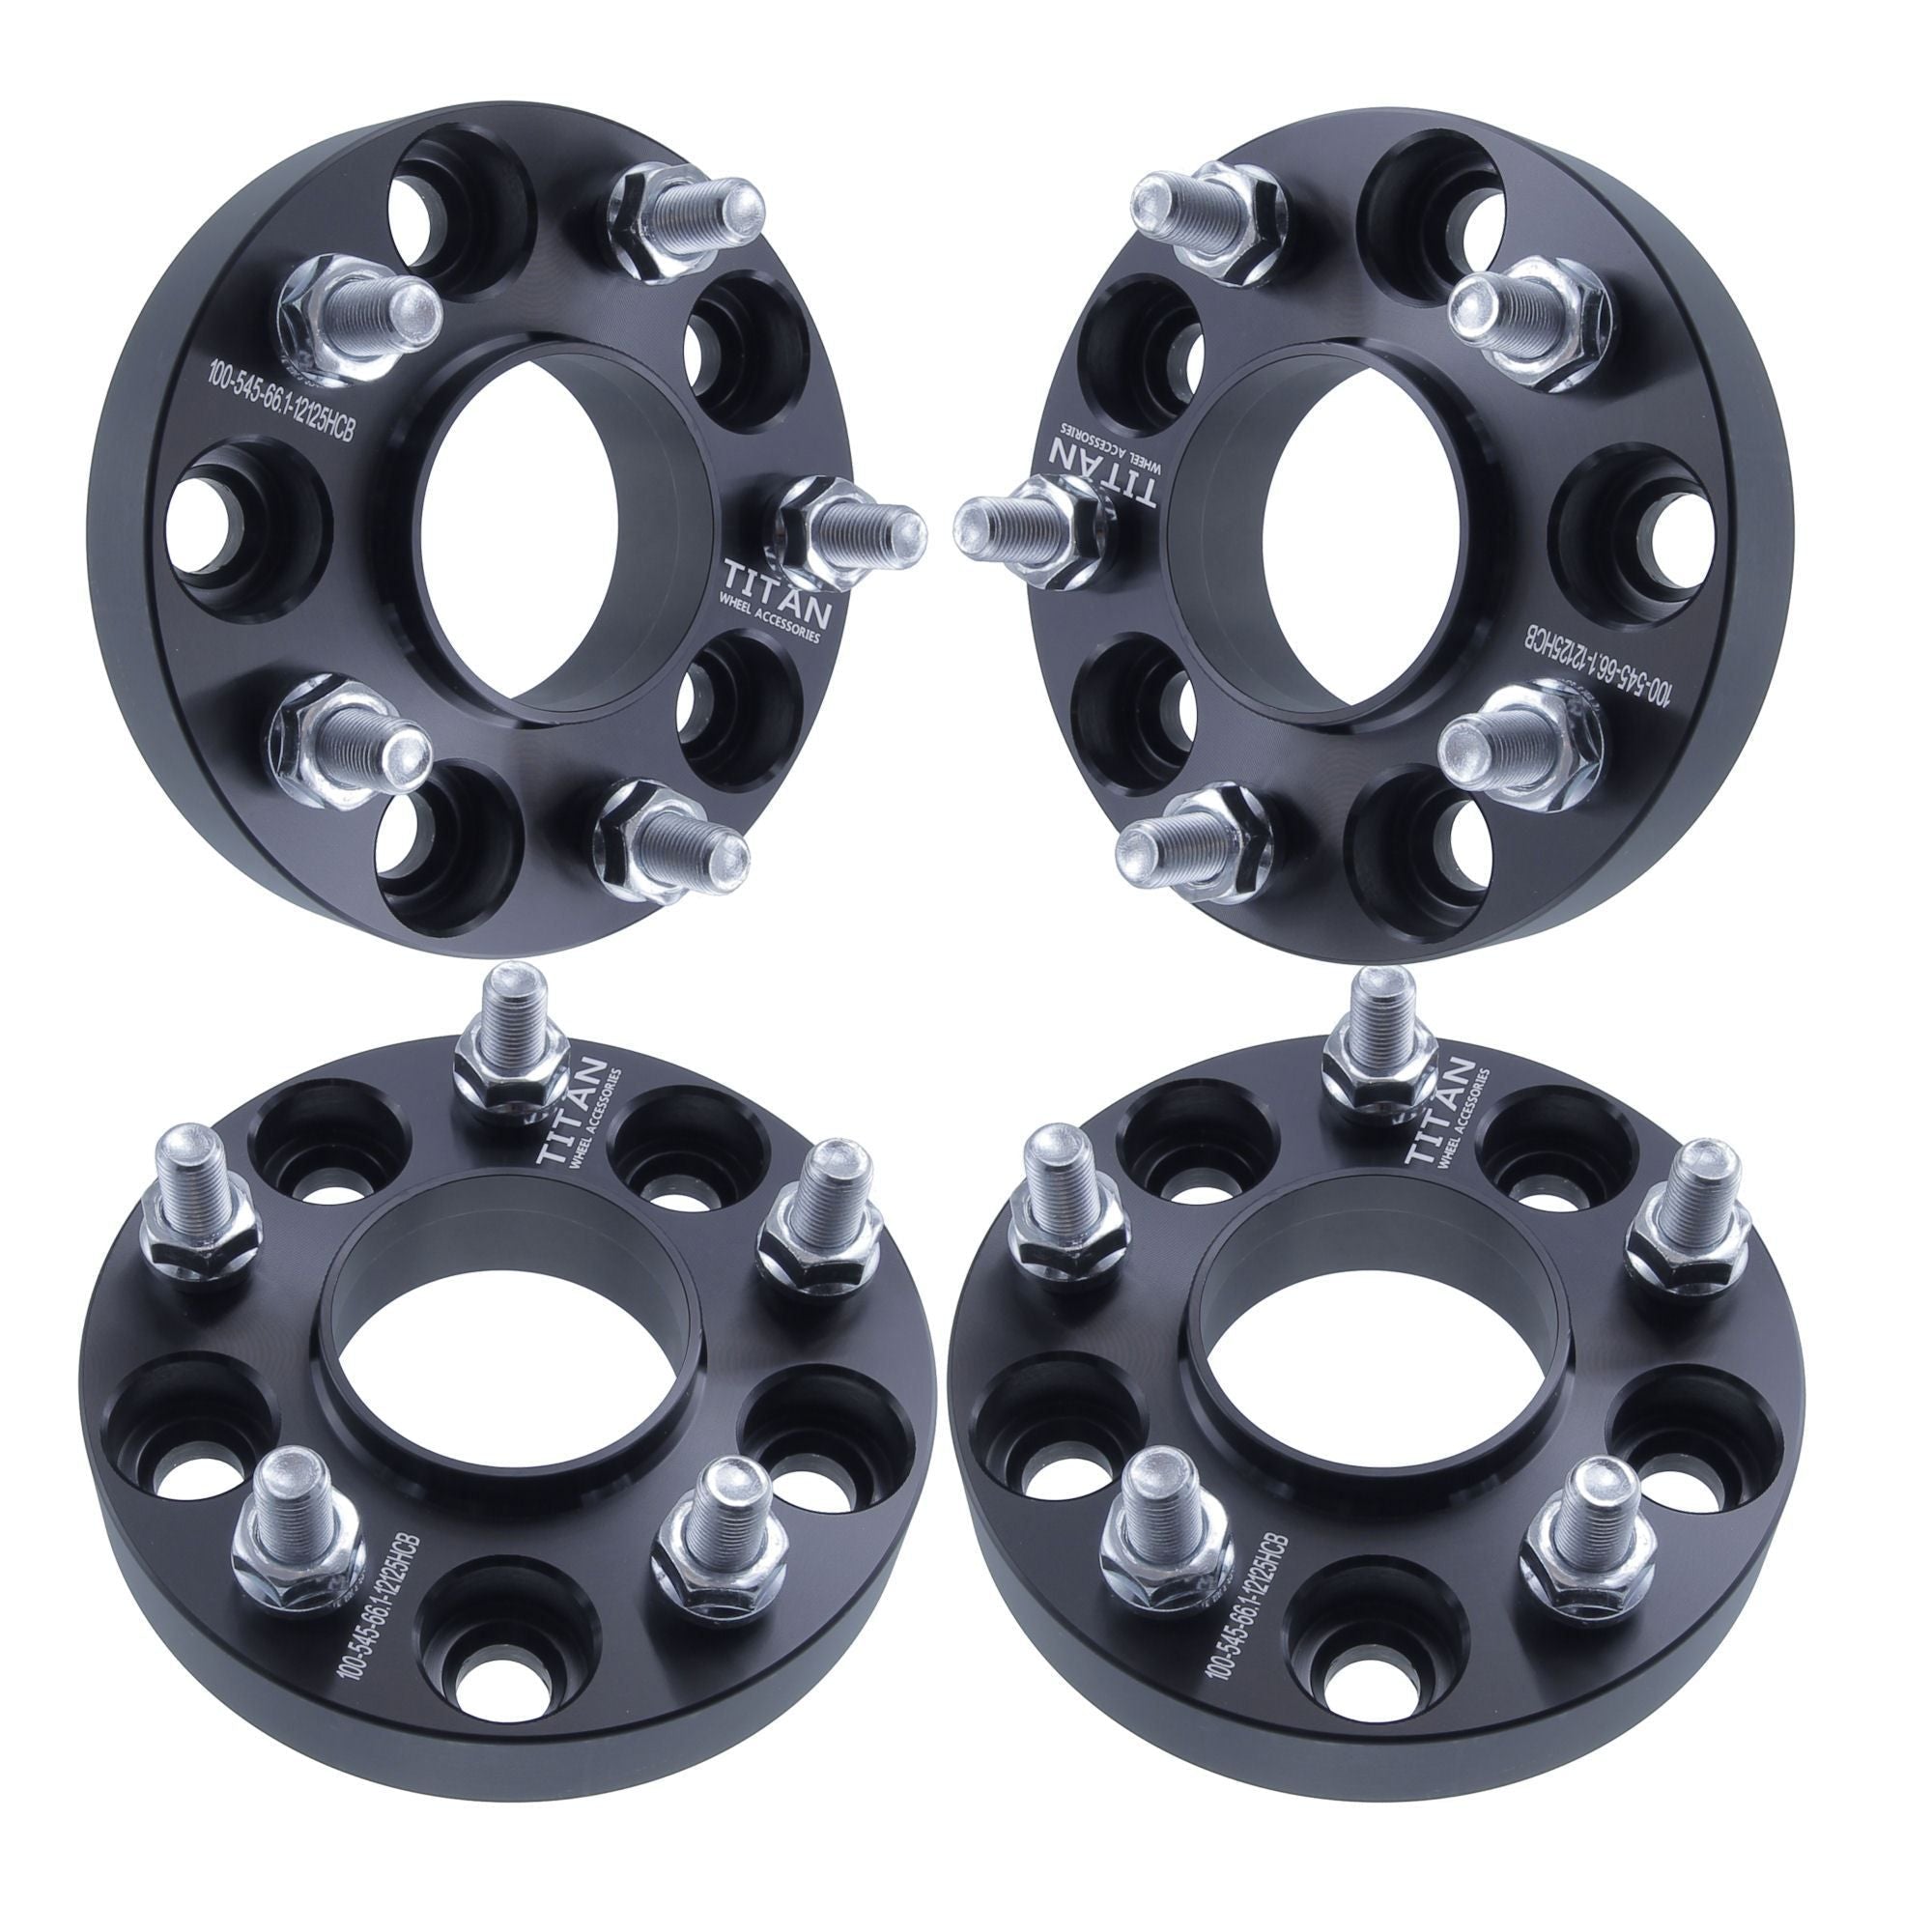 25mm Hubcentric Wheel Spacers for Nissan Infiniti G35 G37 | 5x114